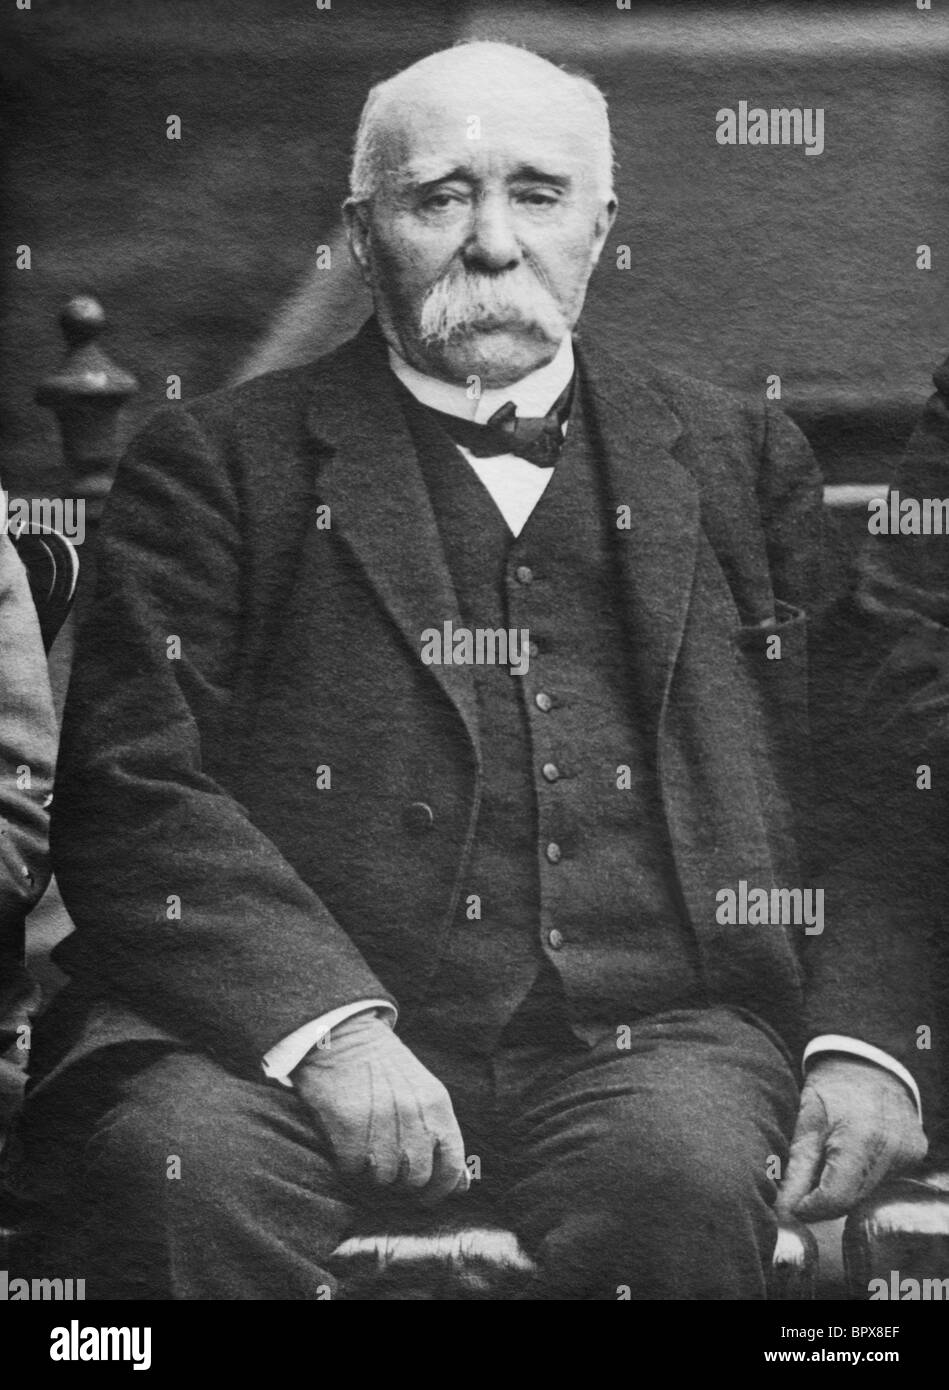 Portrait photo c1918 of French statesman Georges Clemenceau (1841 - 1929) - Prime Minister of France 1906 - 1909 + 1917 - 1920. Stock Photo